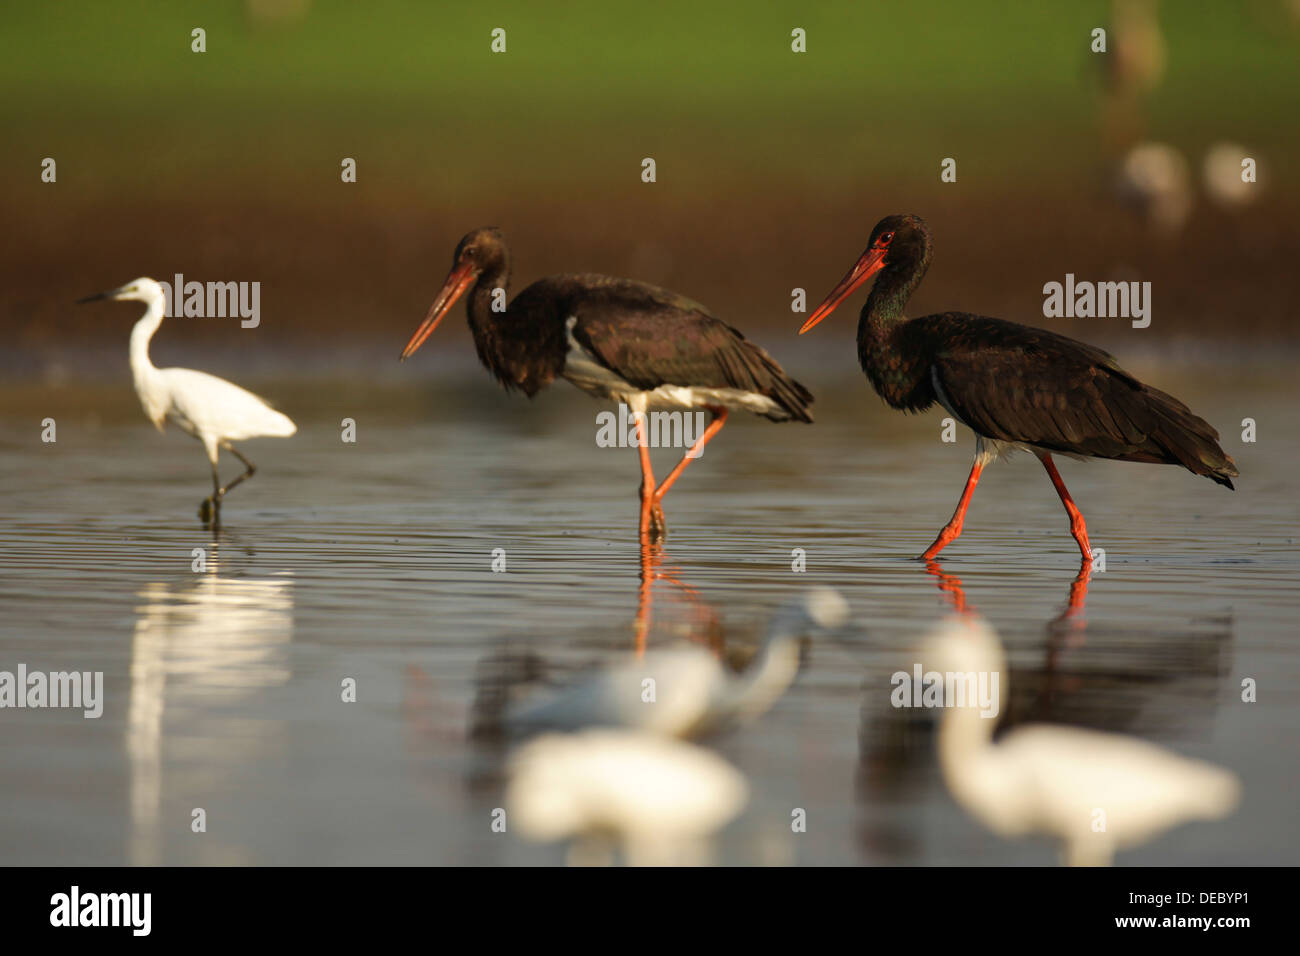 The Black Stork (Ciconia nigra) is a large wading bird in the stork family Ciconiidae. Stock Photo